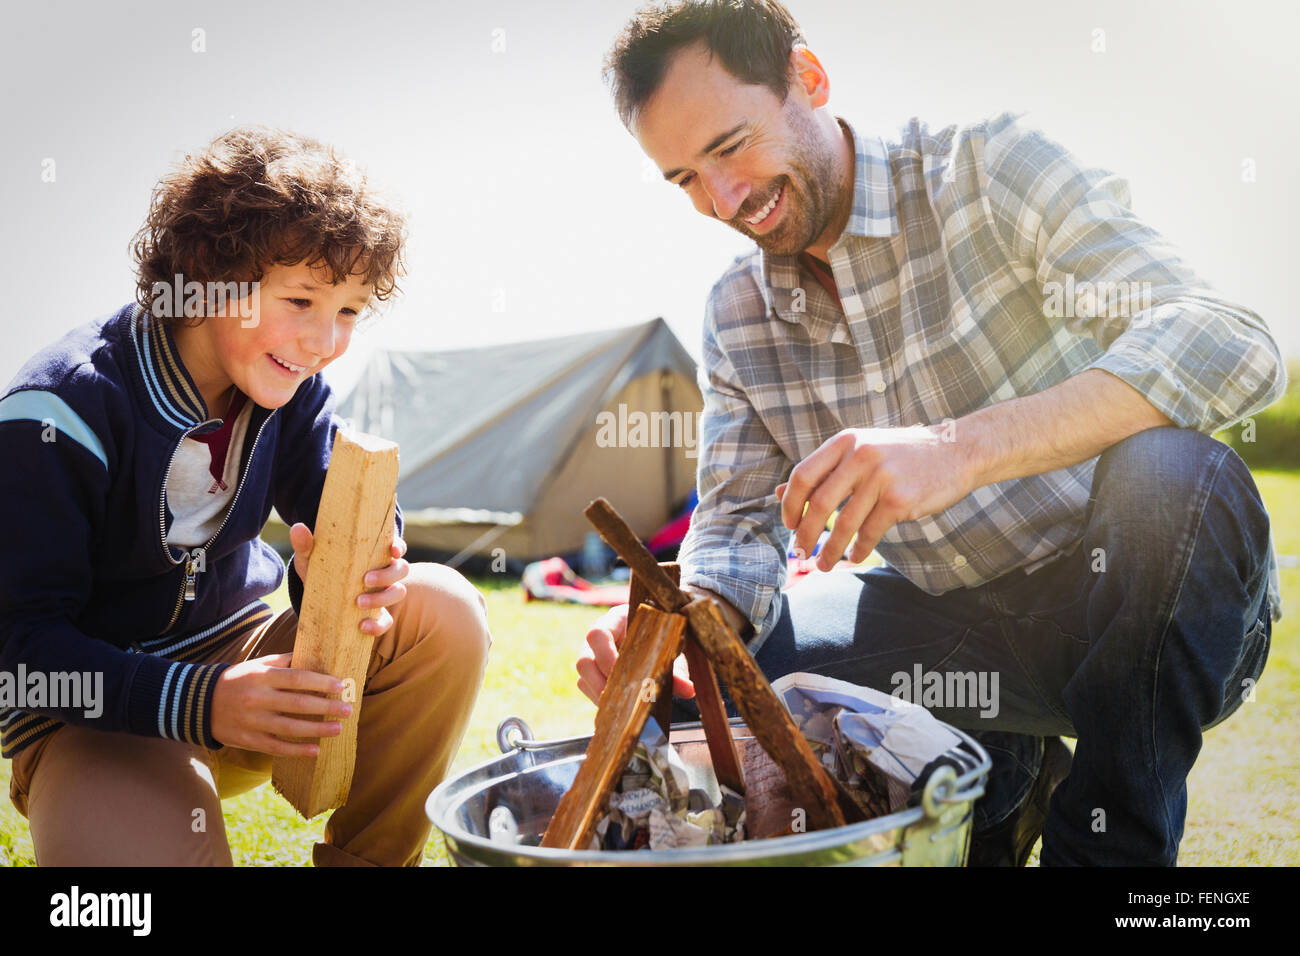 Father and son building campfire Stock Photo